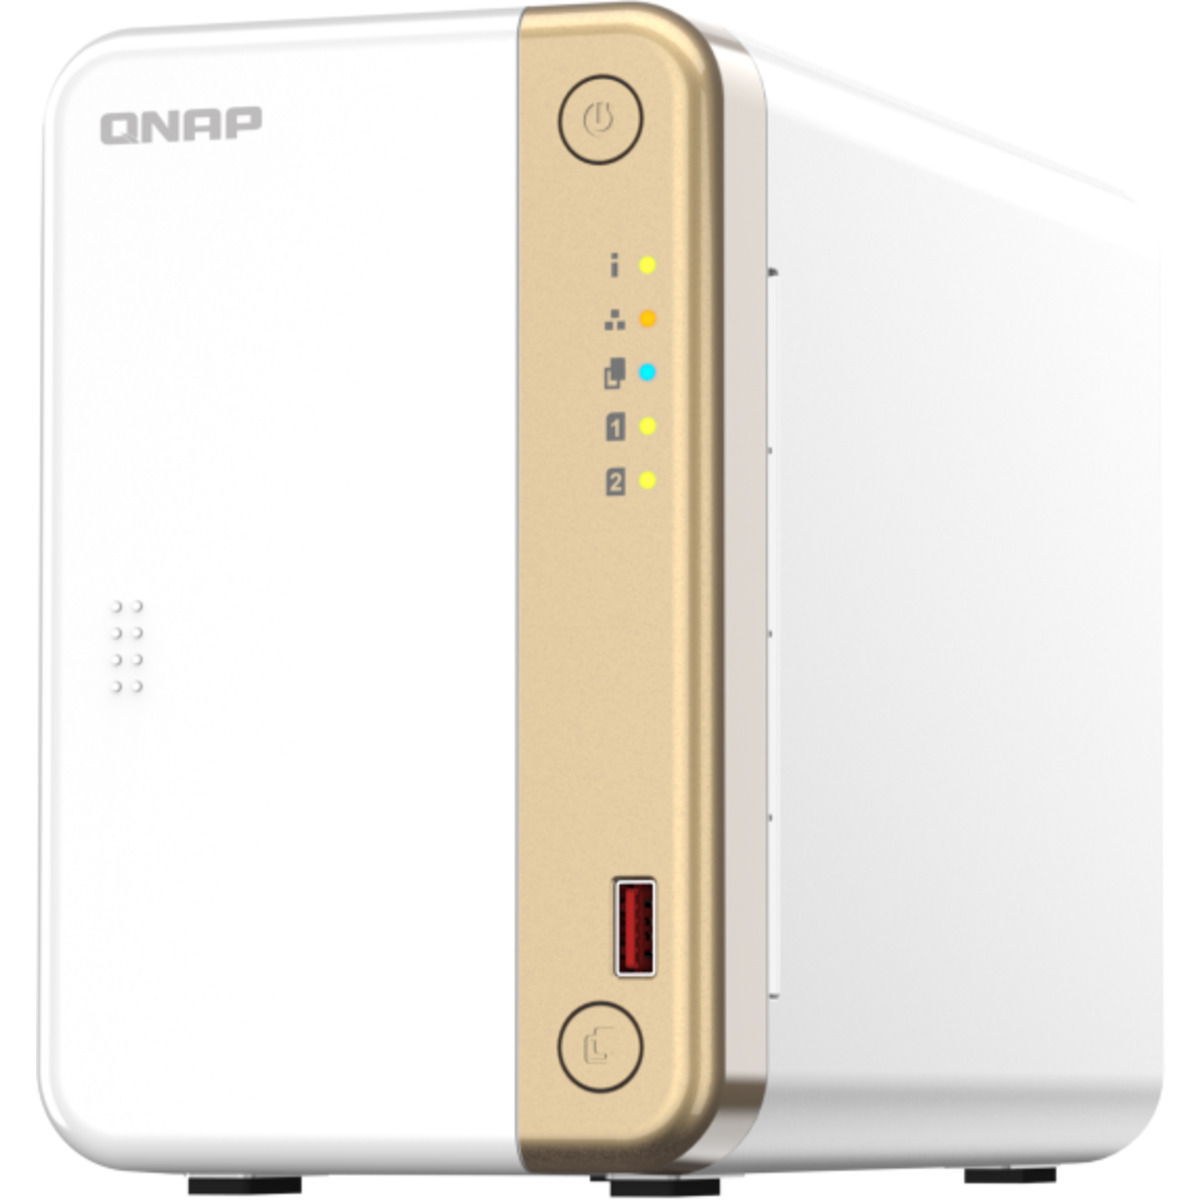 buy QNAP TS-262 4tb Desktop NAS - Network Attached Storage Device 2x2000gb Seagate IronWolf Pro ST2000NT001 3.5 7200rpm SATA 6Gb/s HDD NAS Class Drives Installed - Burn-In Tested - nas headquarters buy network attached storage server device das new raid-5 free shipping simply usa TS-262